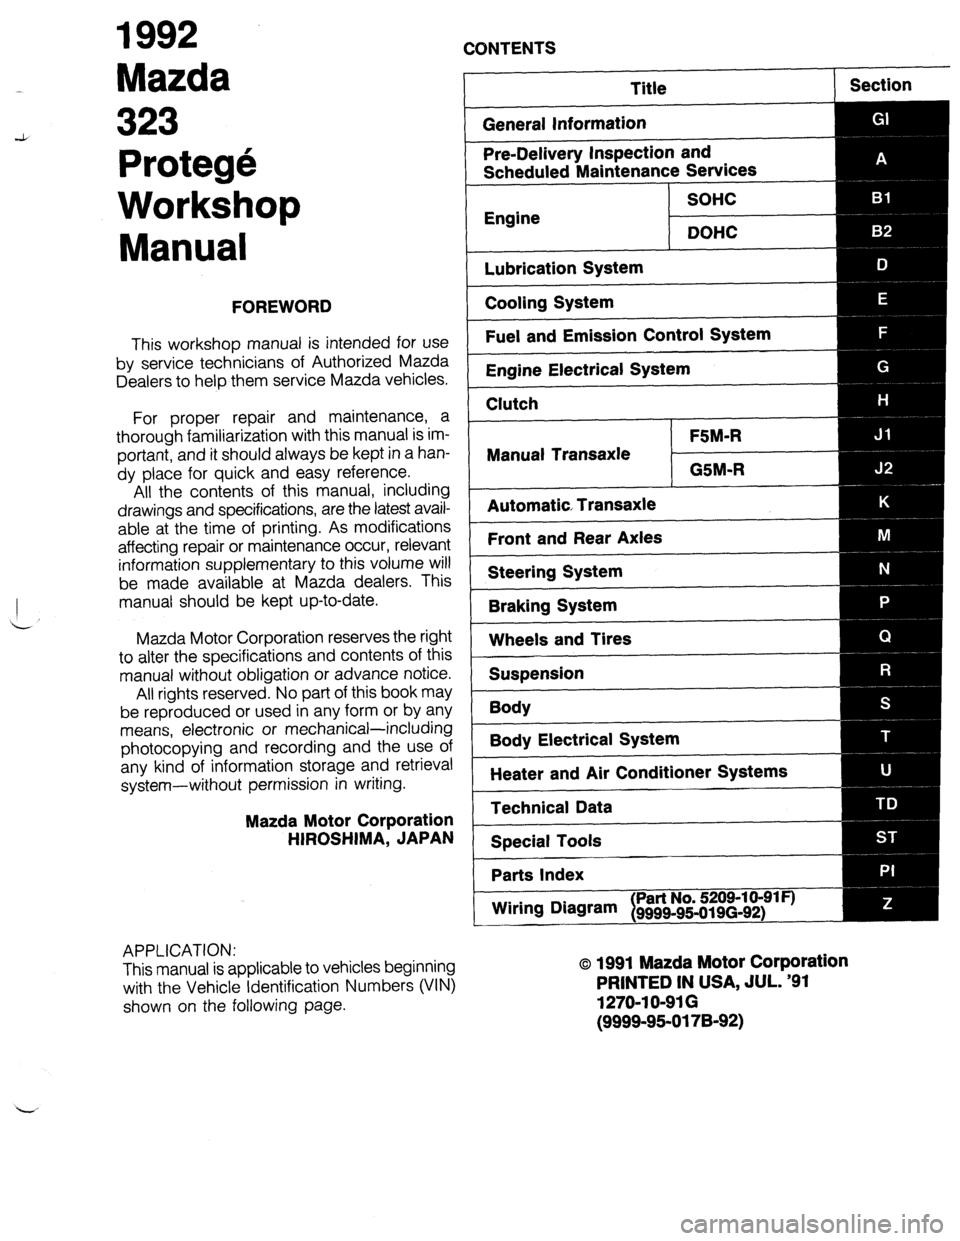 MAZDA 323 1989  Factory Repair Manual 1992 
Mazda 
CONTENTS 
Protege 
Workshop 
Manual 
FOREWORD 
This workshop manual is intended for use 
by service technicians of Authorized Mazda 
Dealers to help them service Mazda vehicles. 
For prop